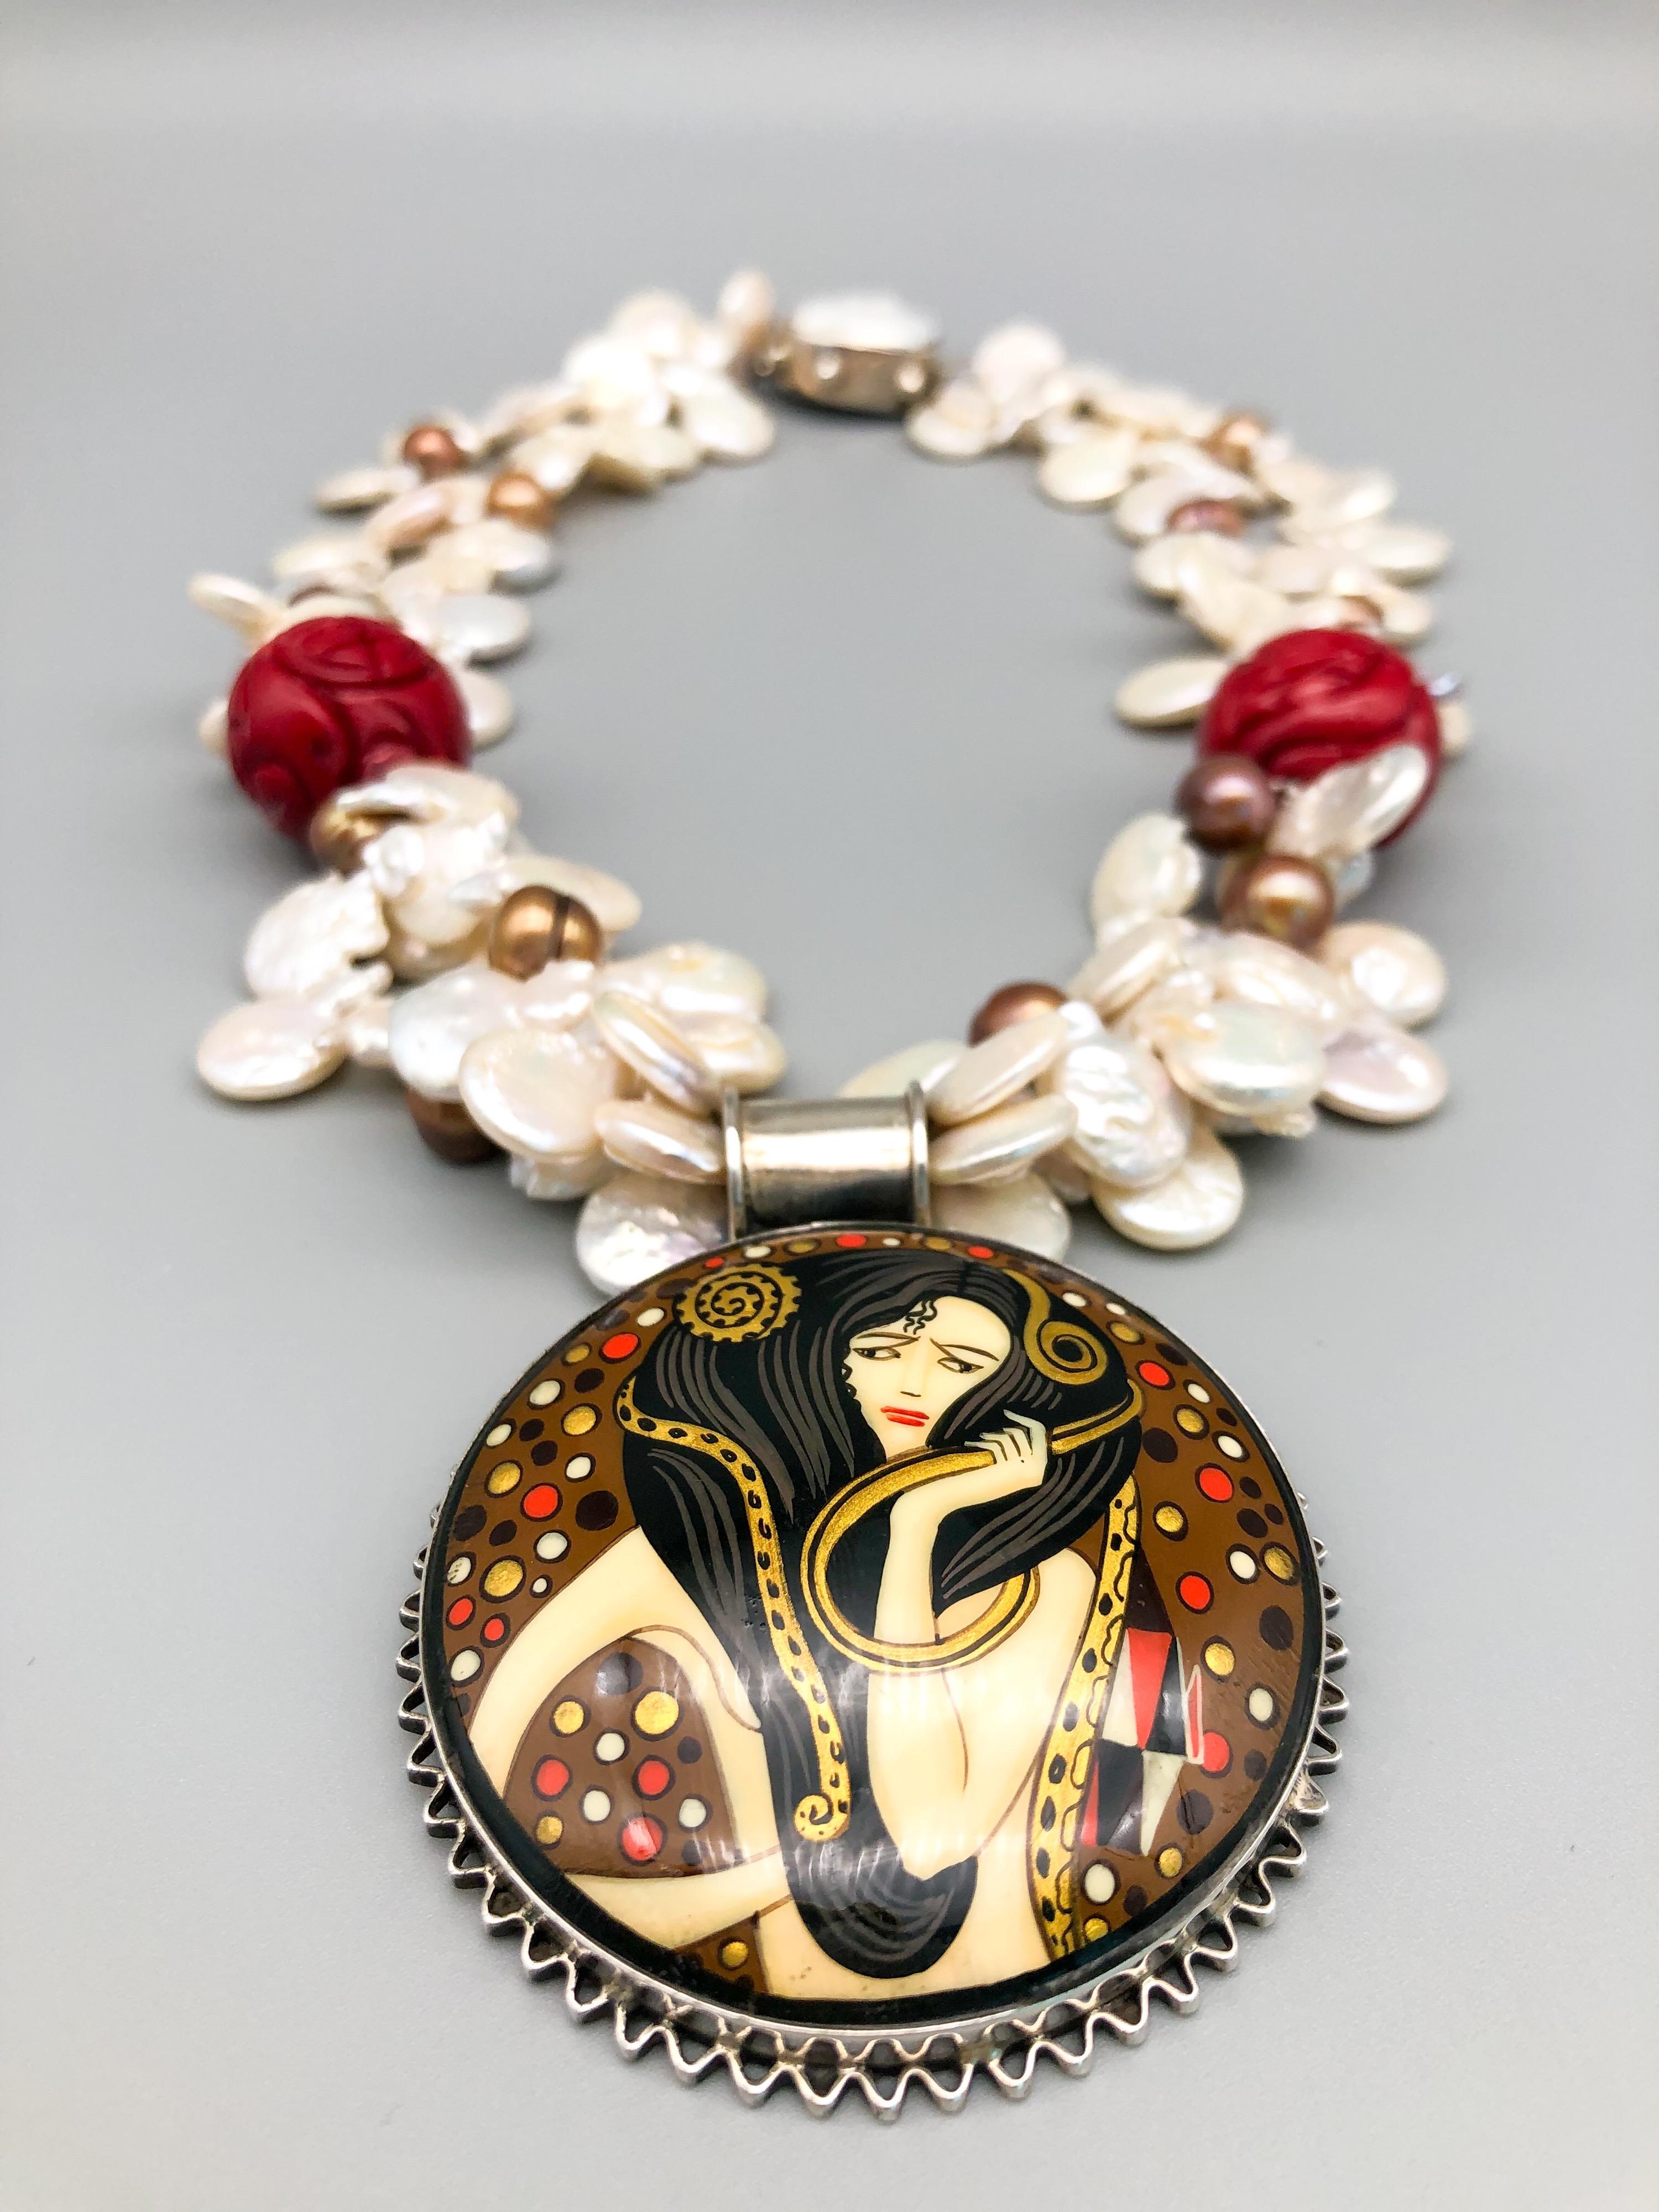 Contemporary A.Jeschel Russian miniature pendant painted in the style of Klimt